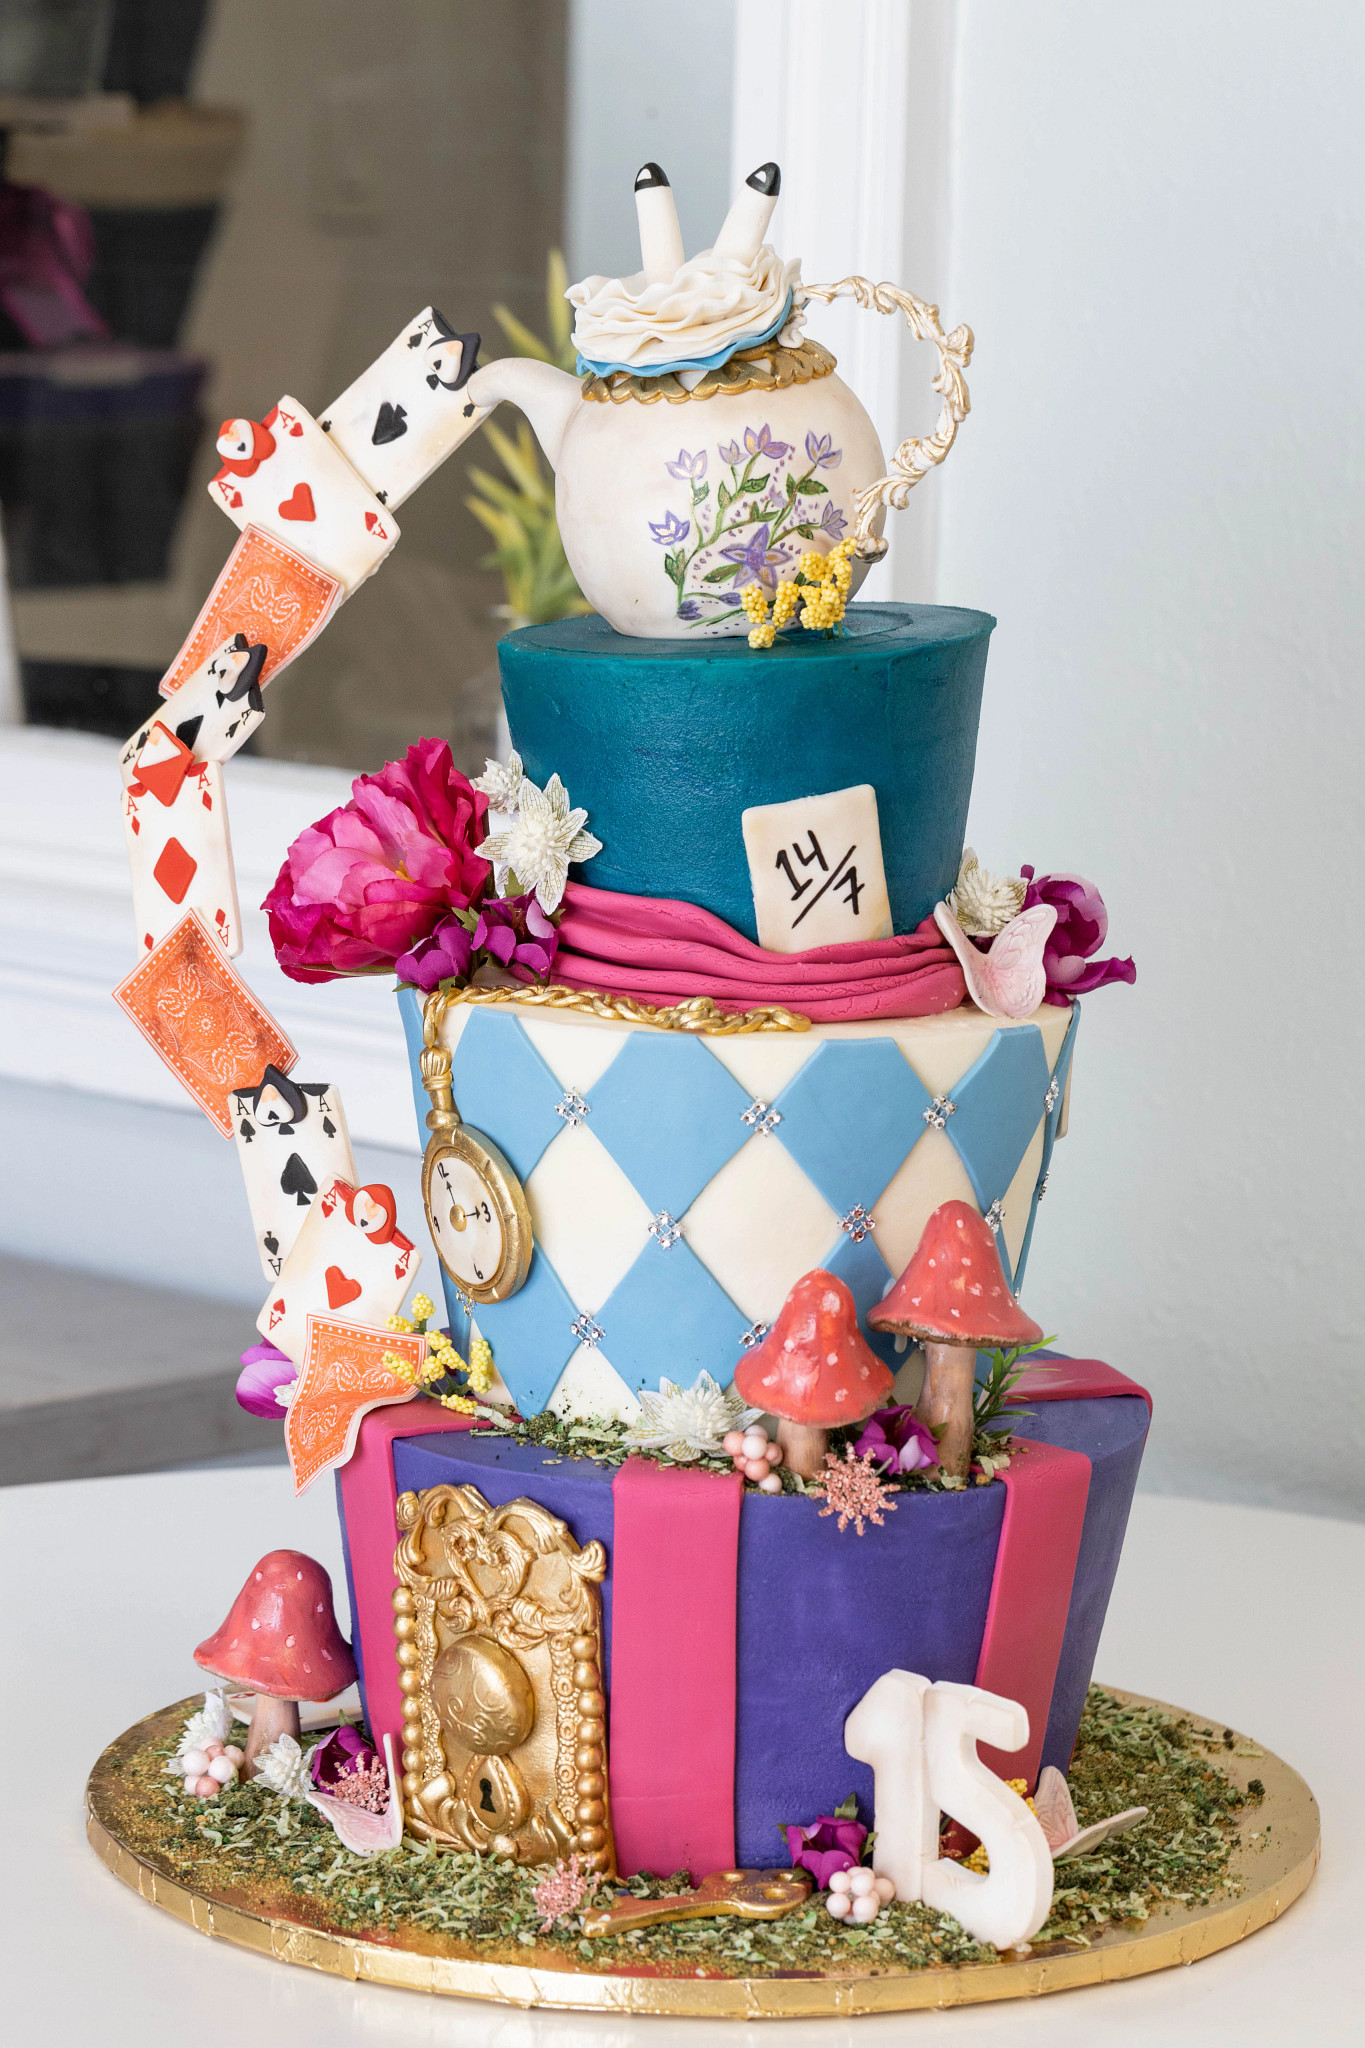 4 weird and wonderful wedding cake facts | Cakes by Robin